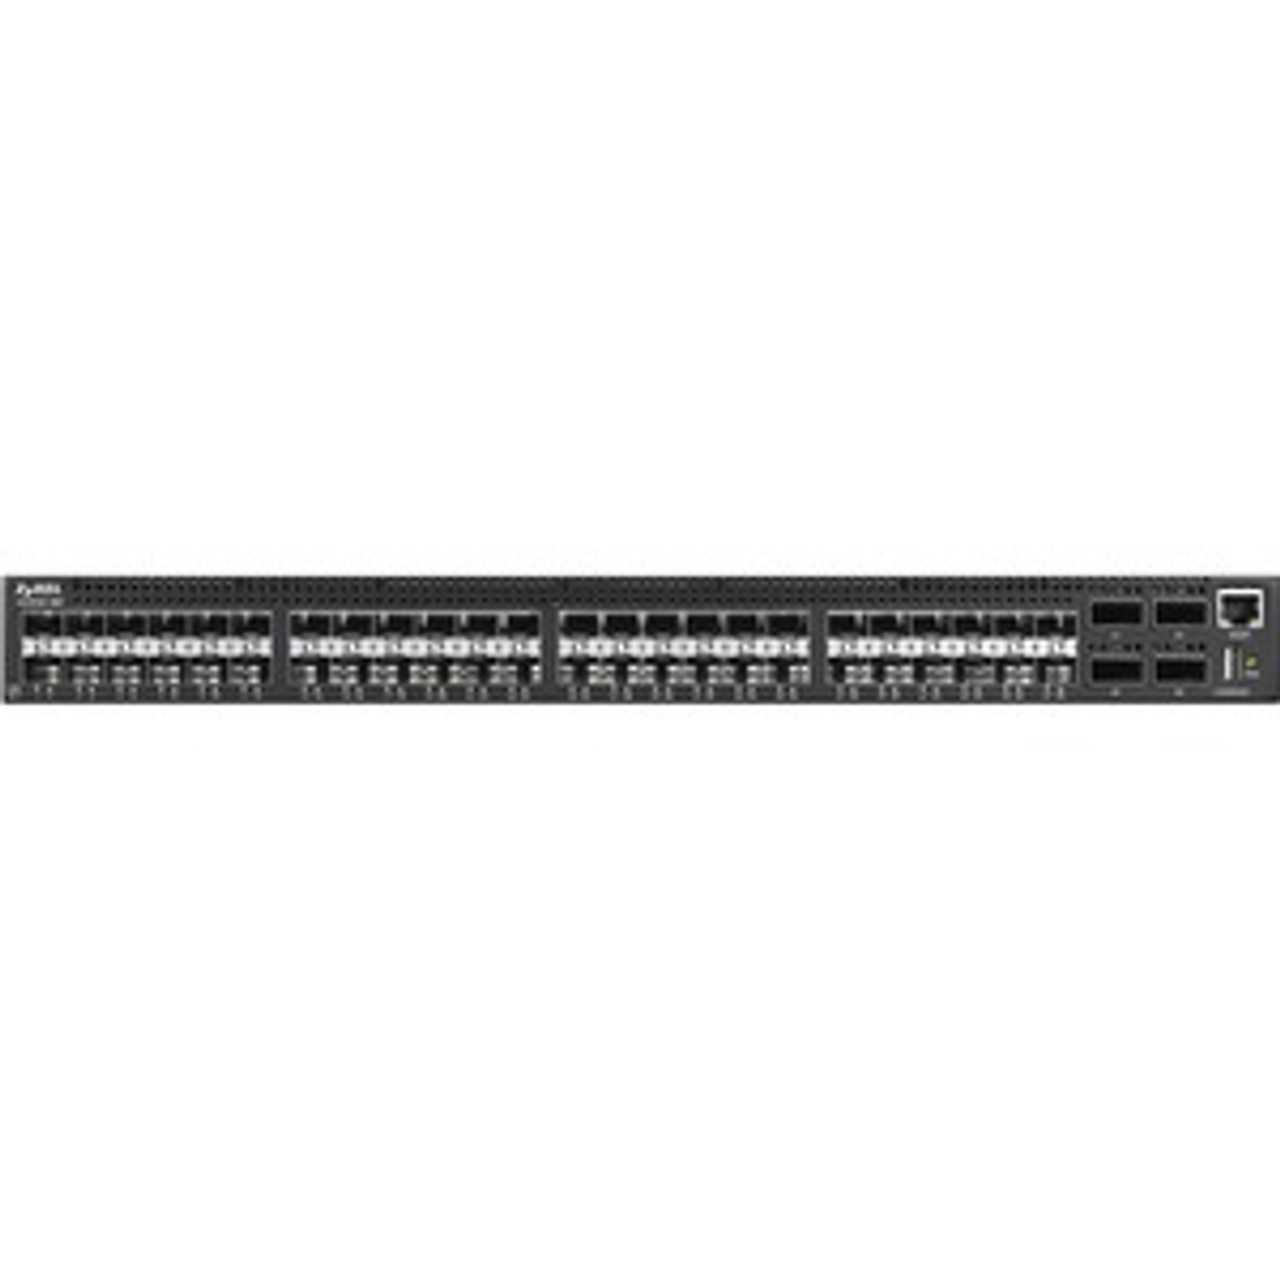 XS3900-RACK ZYXEL 48-Port 10gbe Top-Of-Rack Switch With 40gbe Uplink (Refurbished)